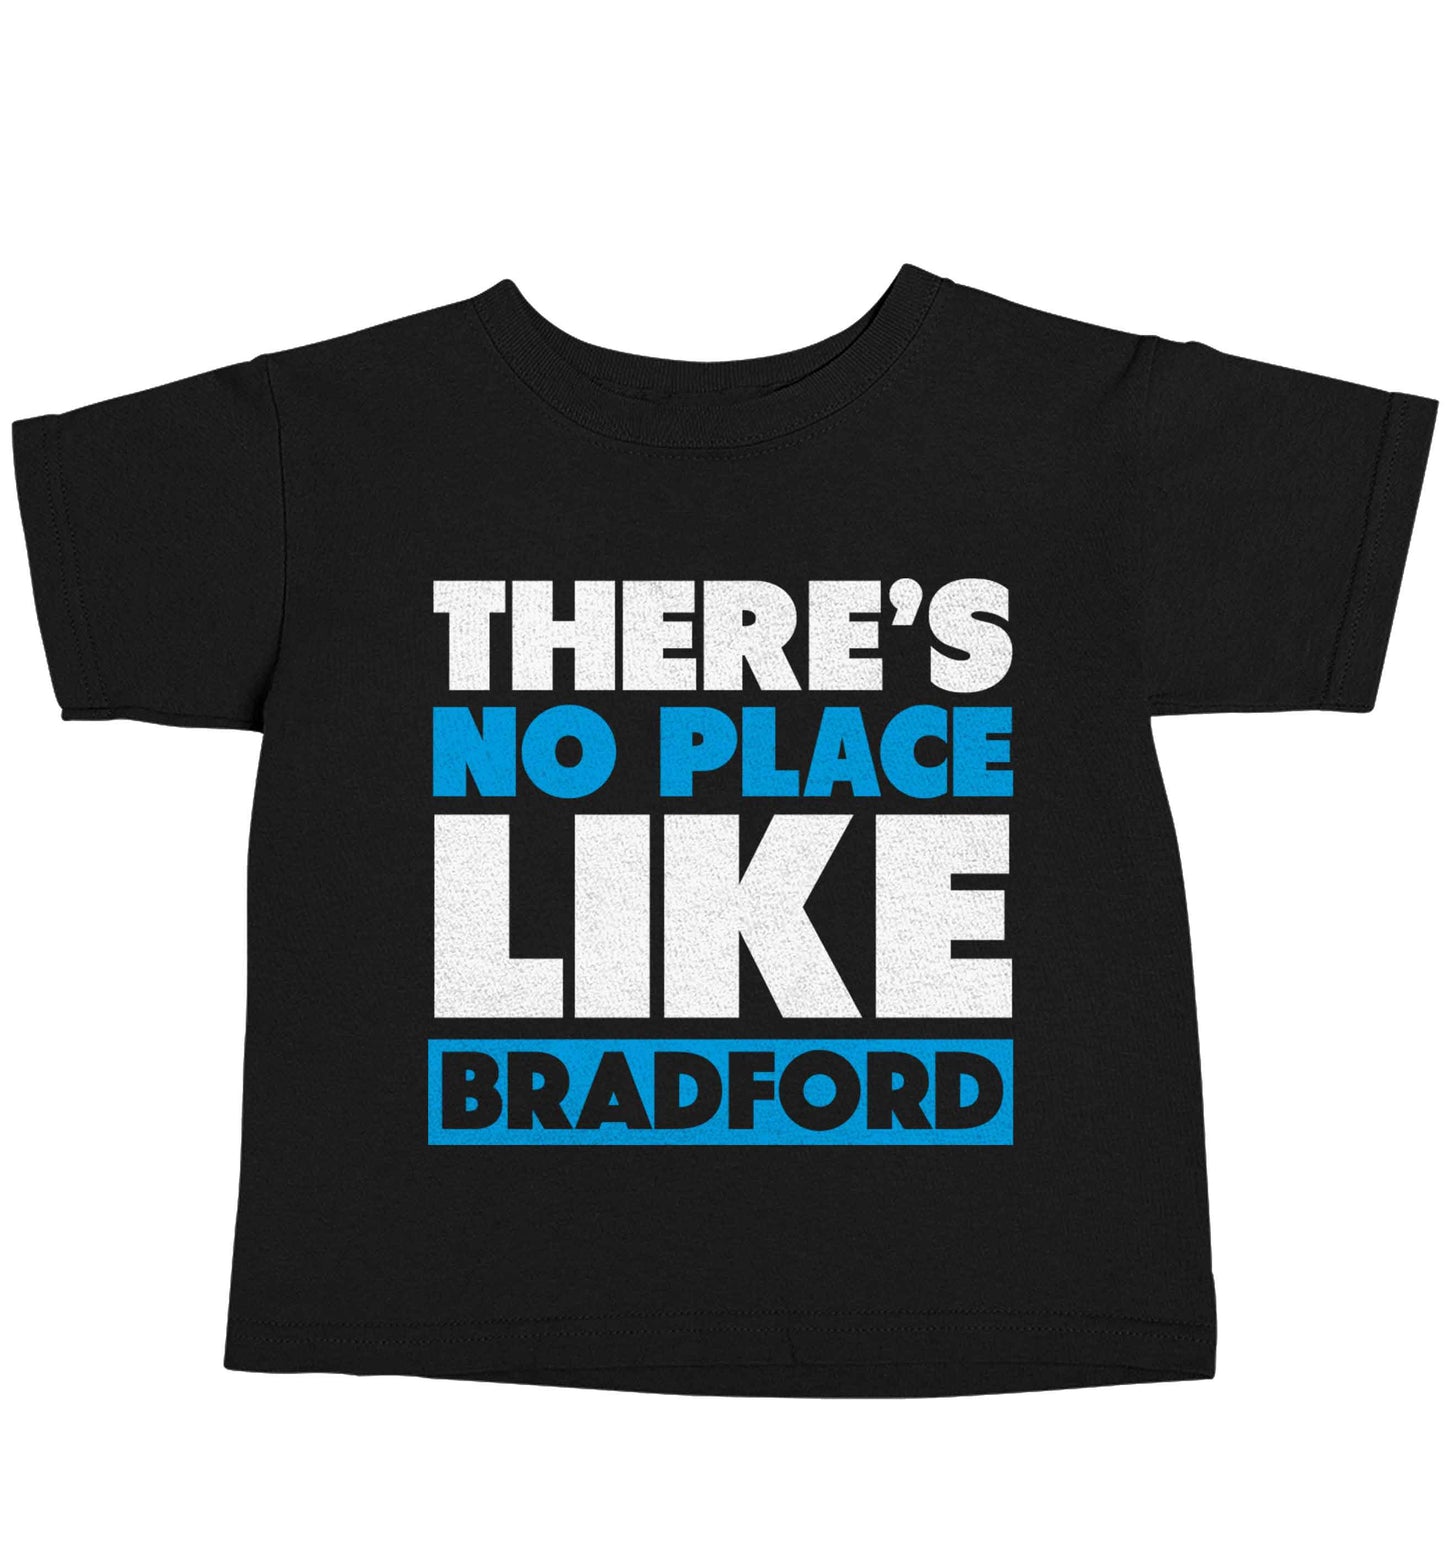 There's no place like Bradford Black baby toddler Tshirt 2 years